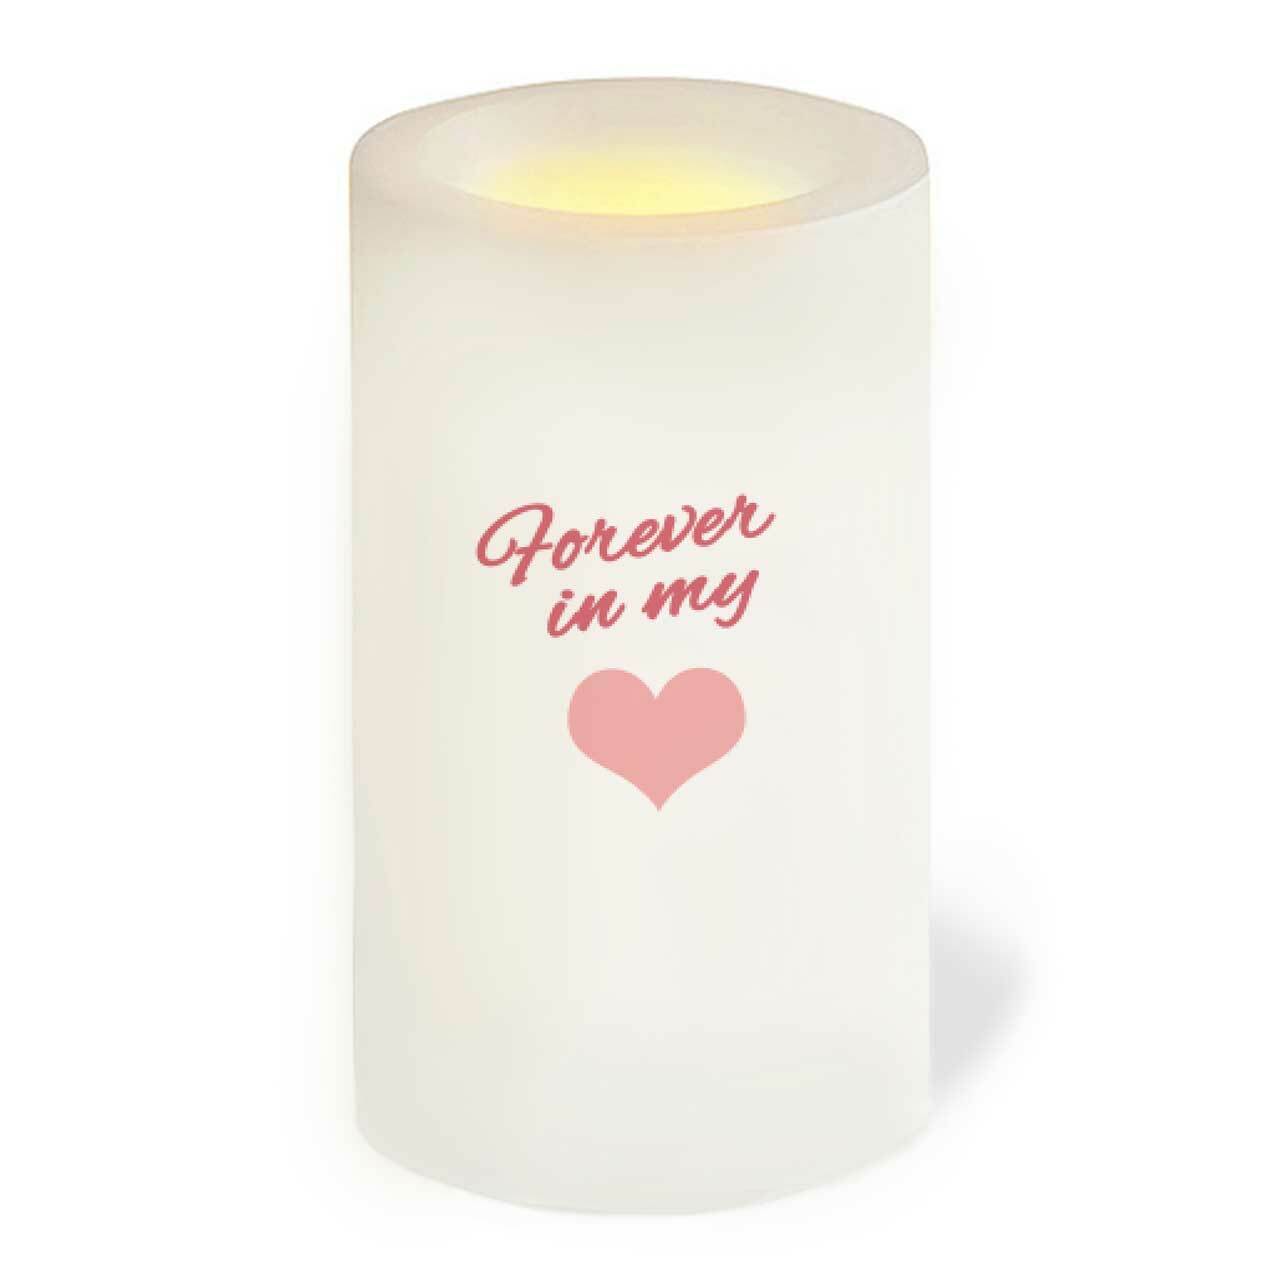 Candle Holders Daughter, Love Mom Candle, Love Daughter